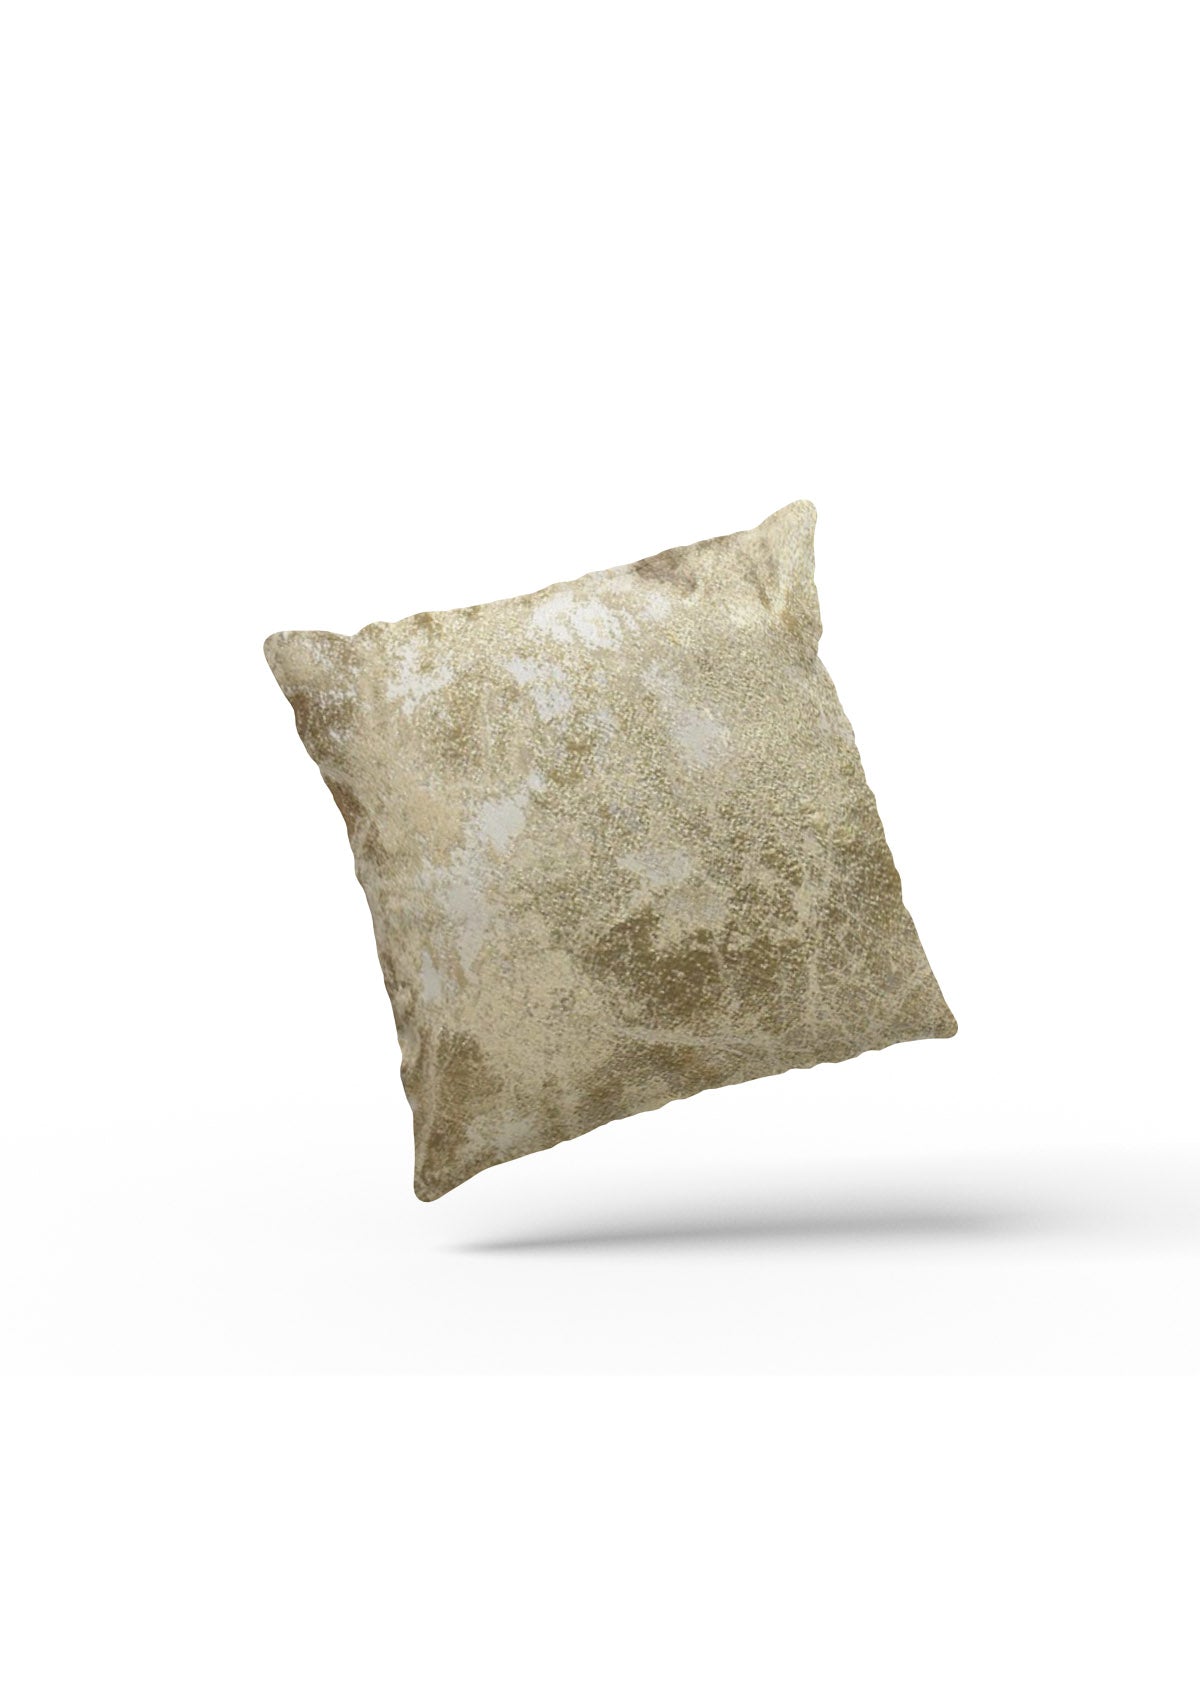  Pale Gold Cushion Covers | CovermyCushion